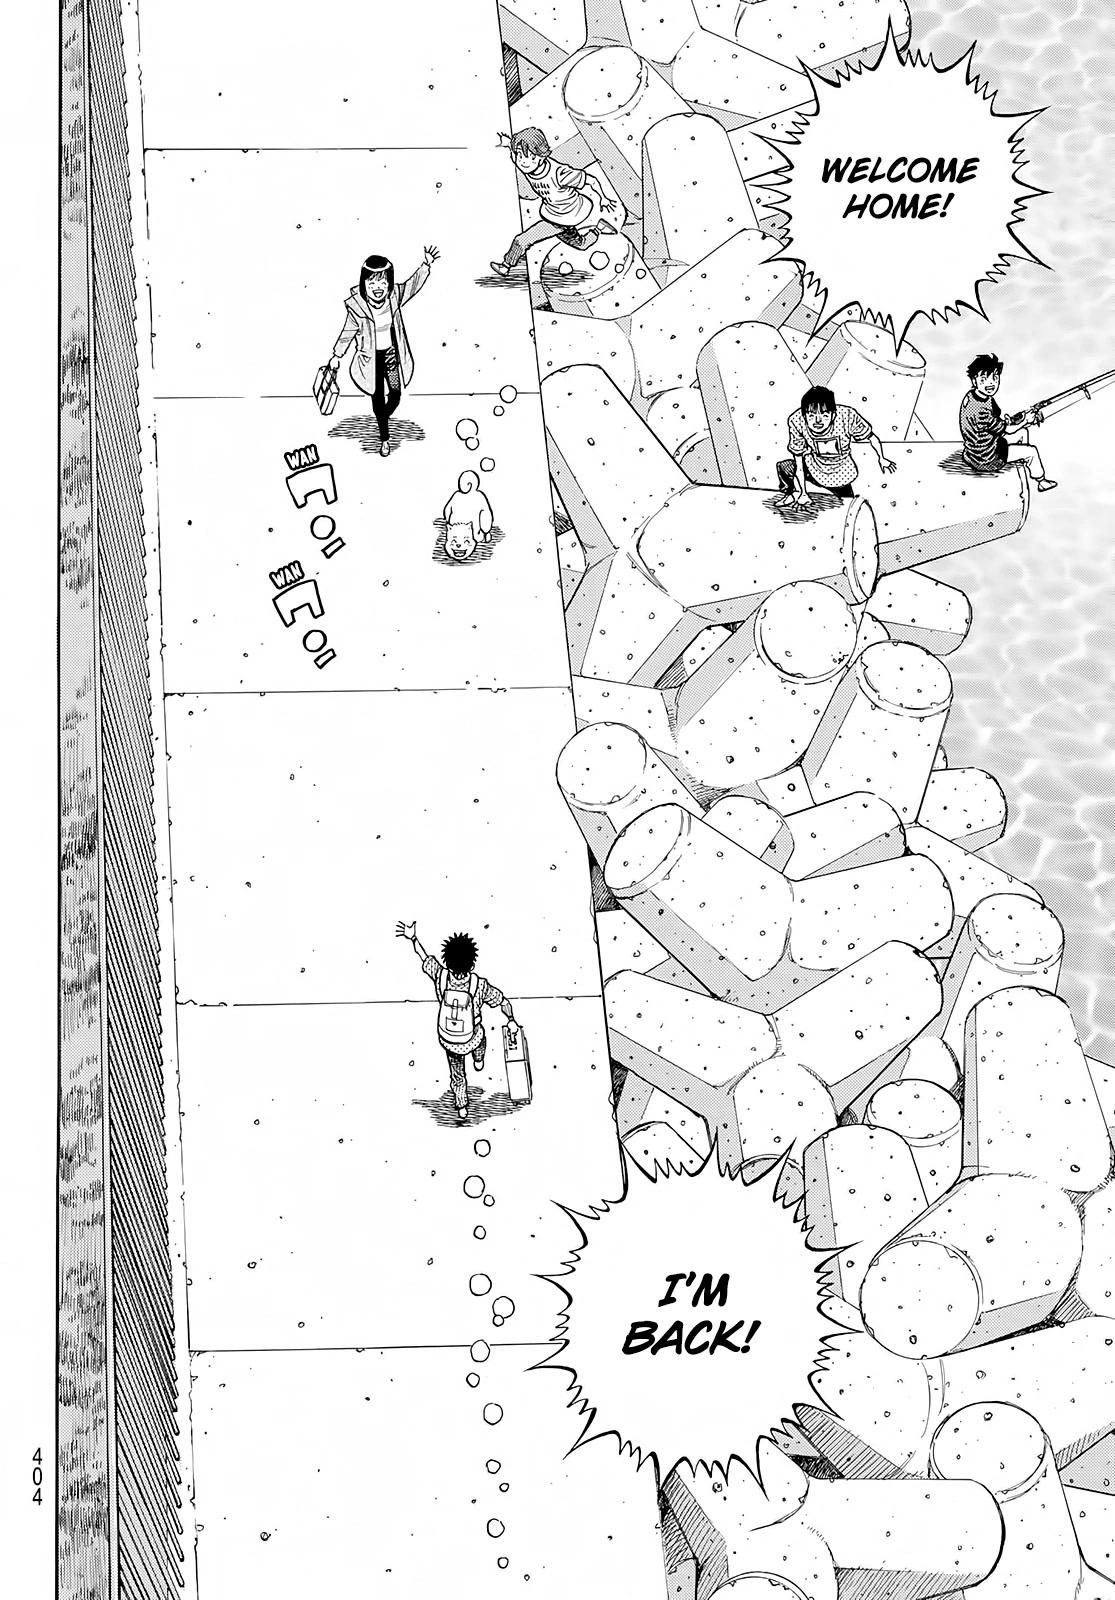 Read Hajime No Ippo Chapter 1413: The Aftermath Of The Heated